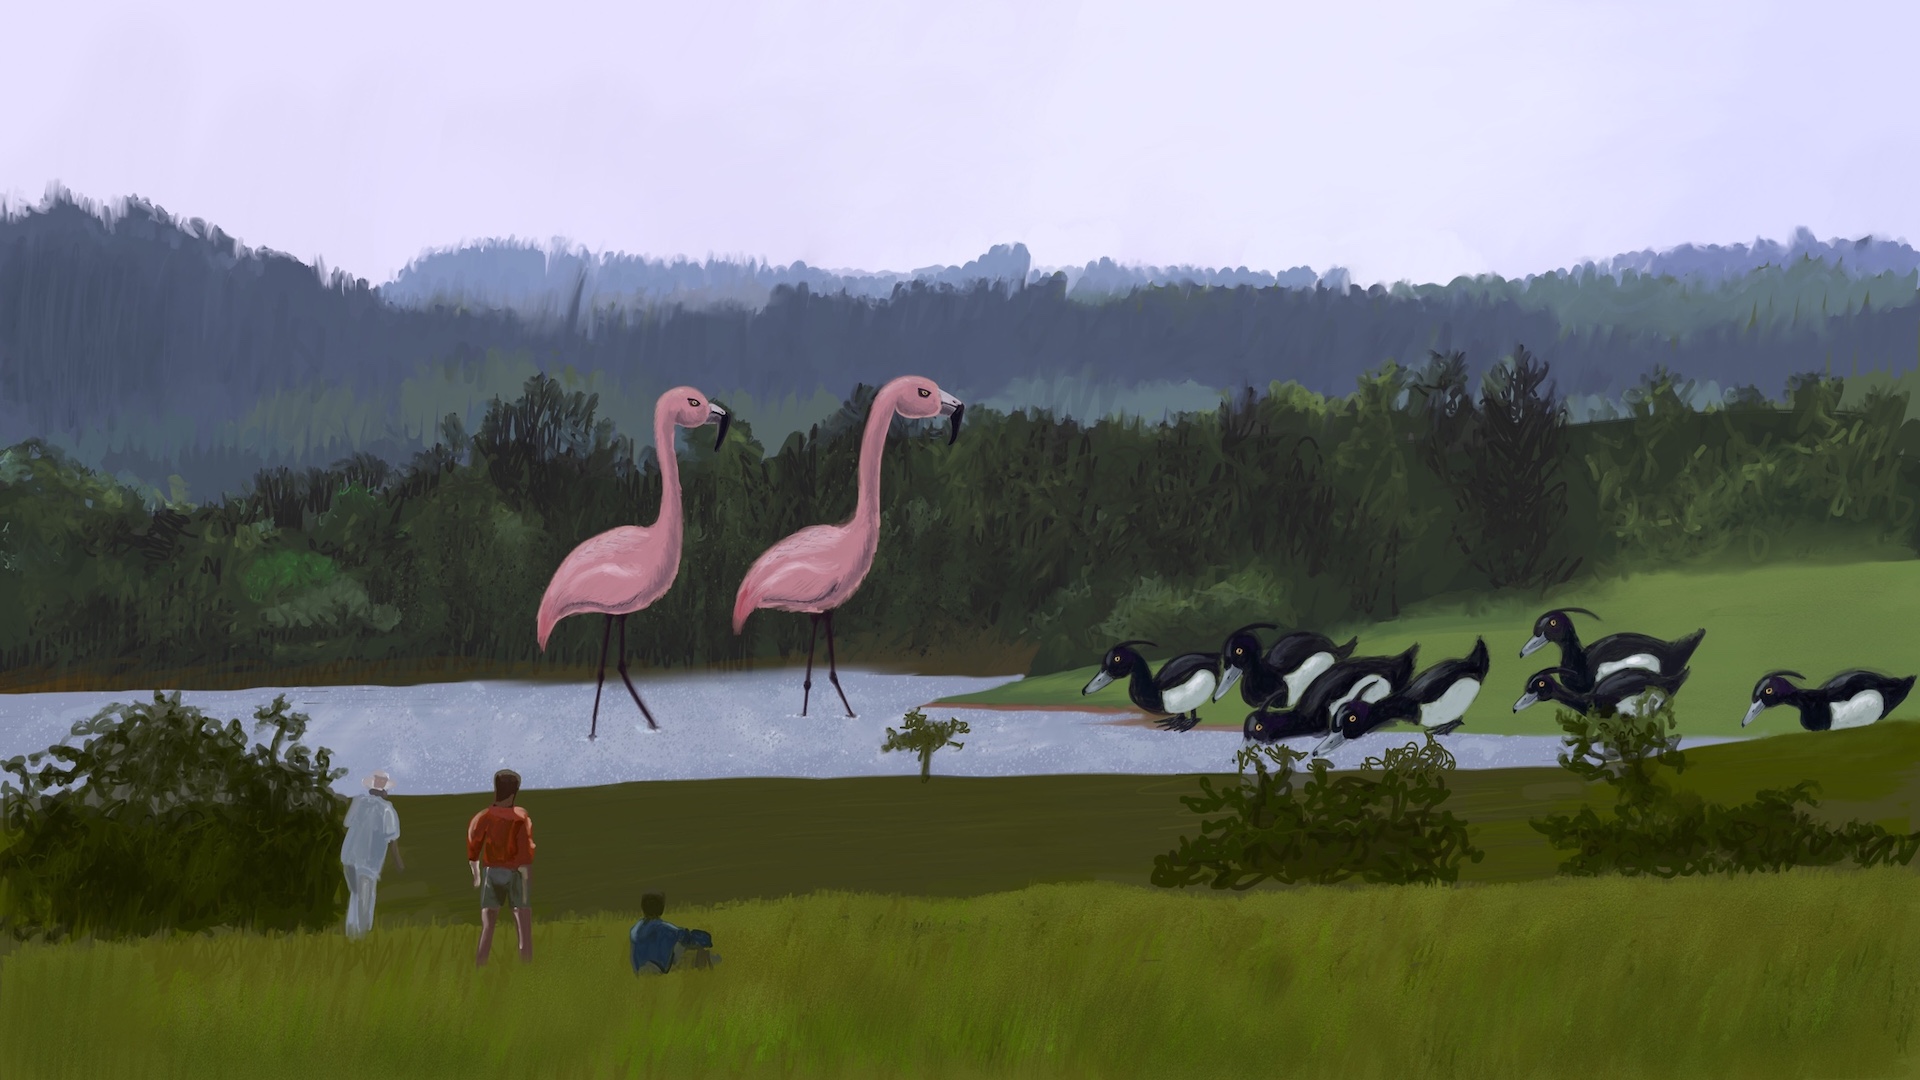 Digitally painted reproduction of of a frame from Jurassic Park, but with giant flamingoes and tufted ducks instead of dinosaurs.